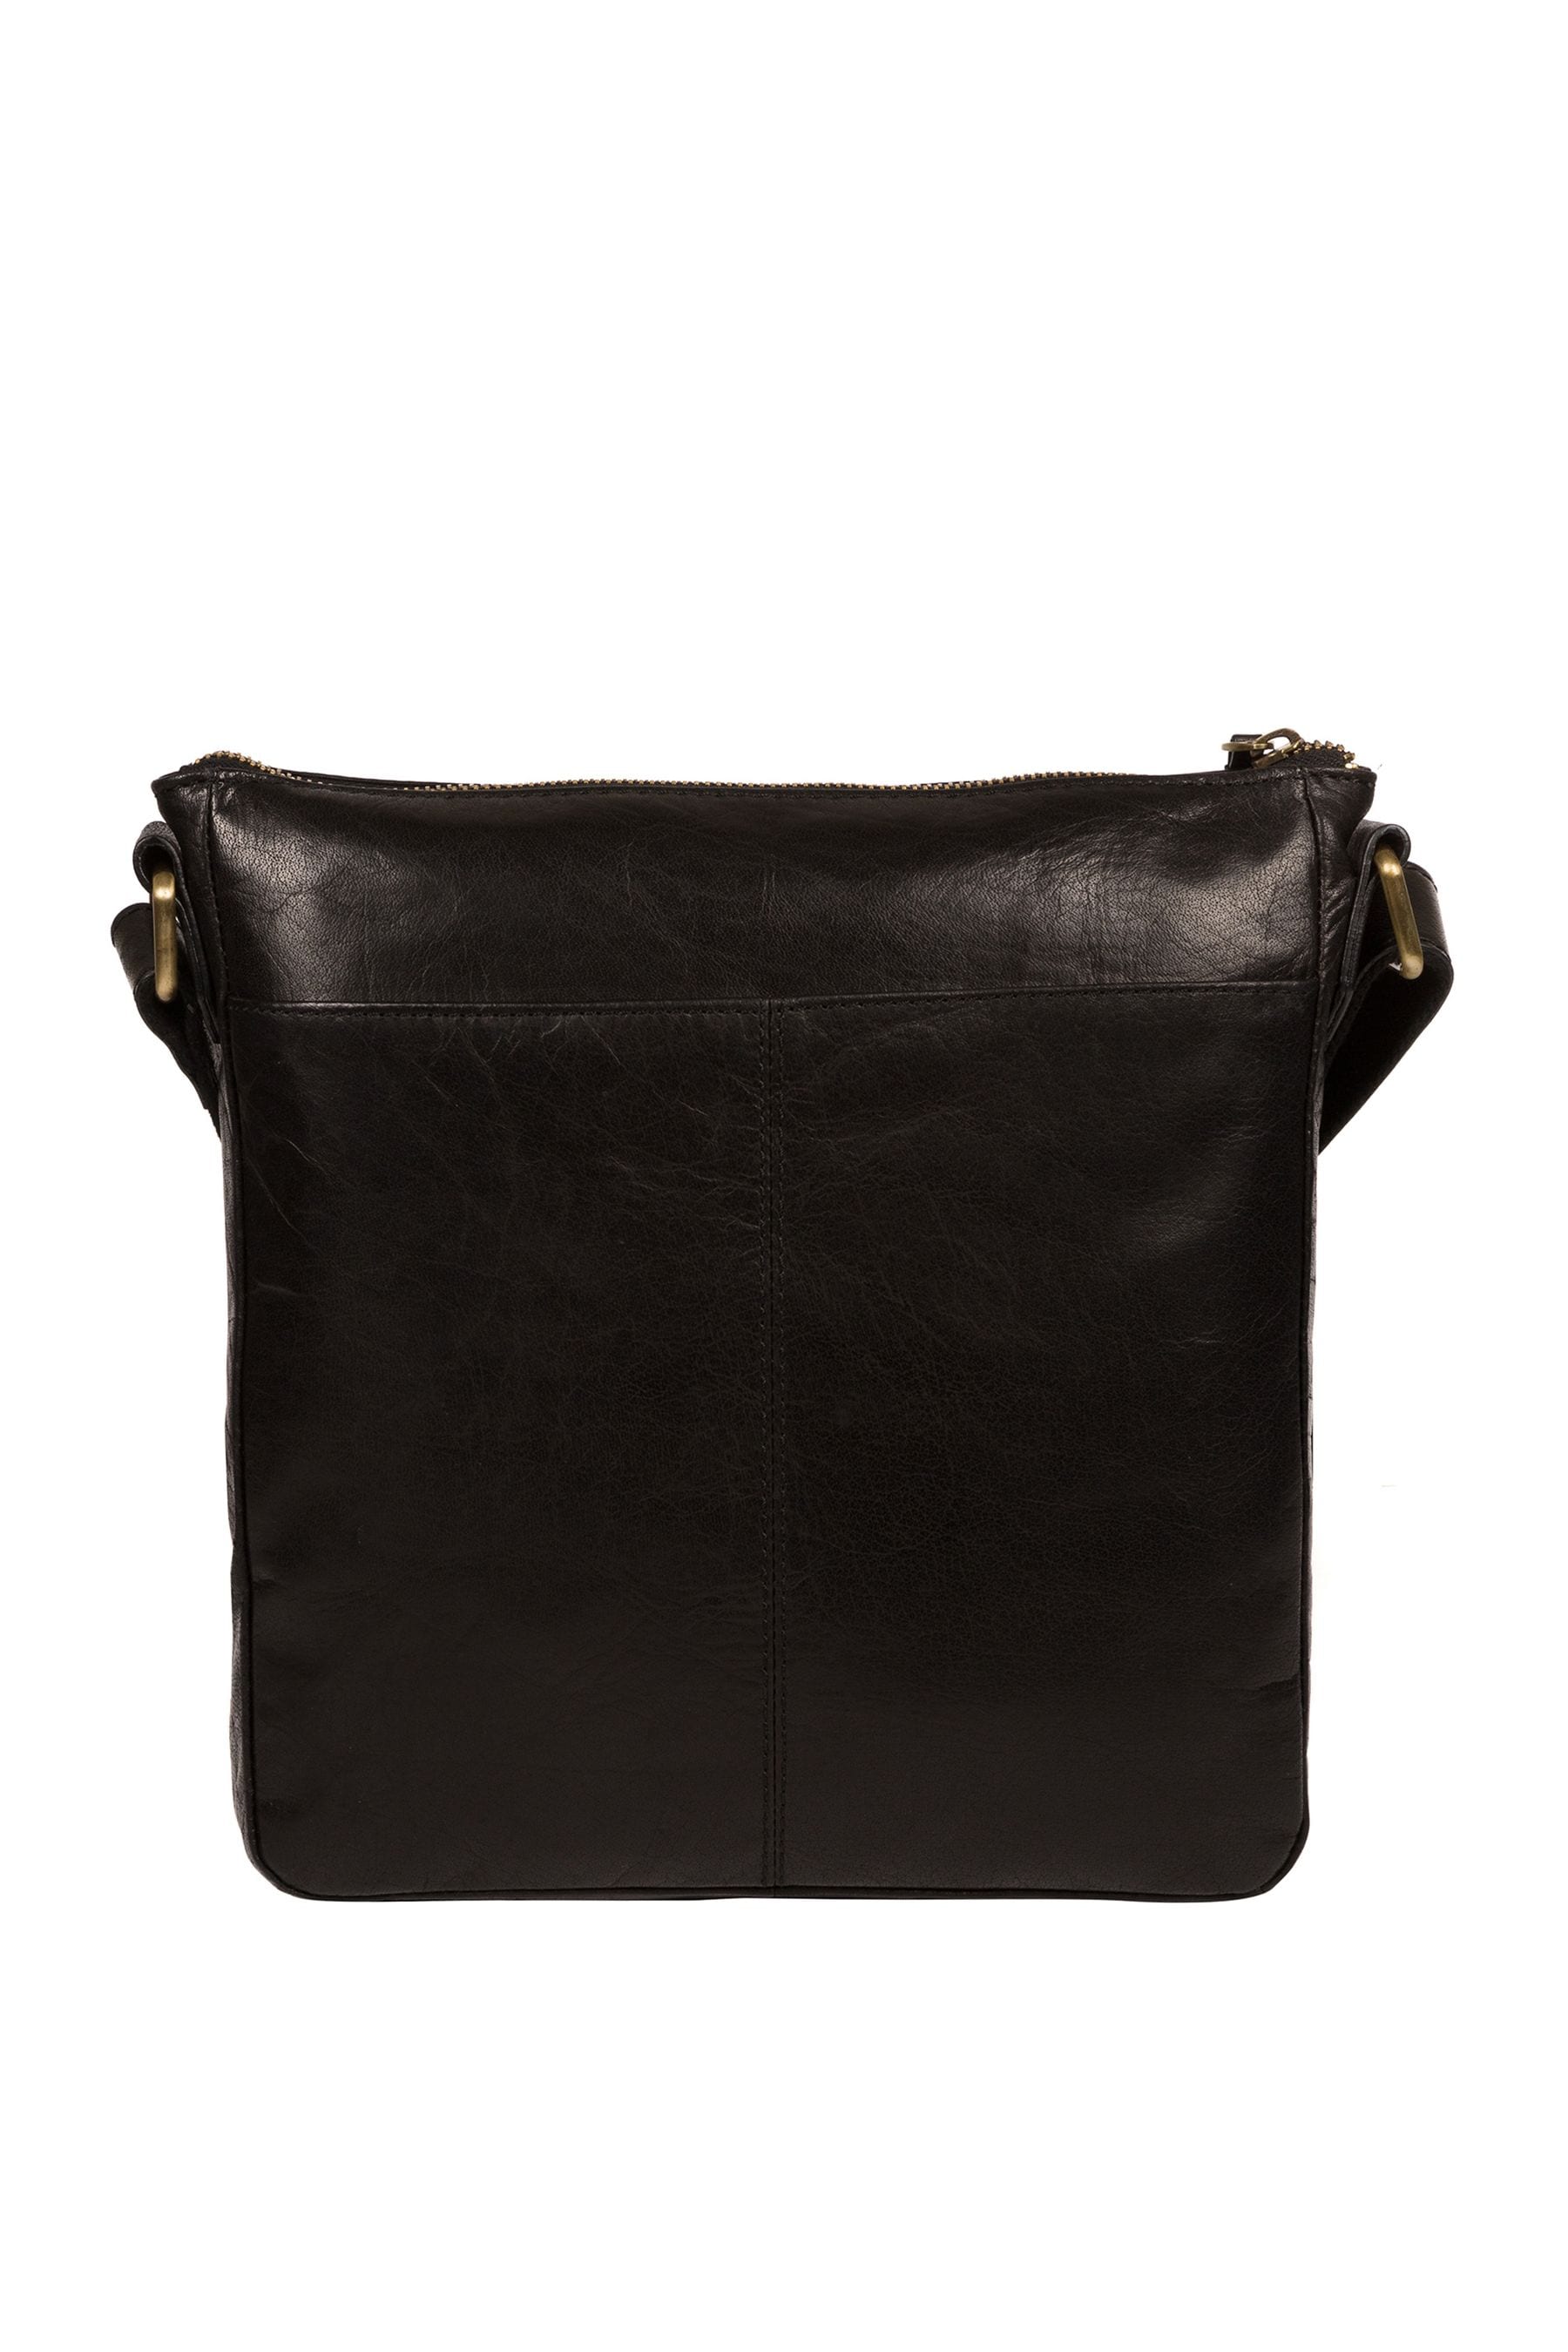 Buy Conkca Josephine Leather Shoulder Bag from the Next UK online shop